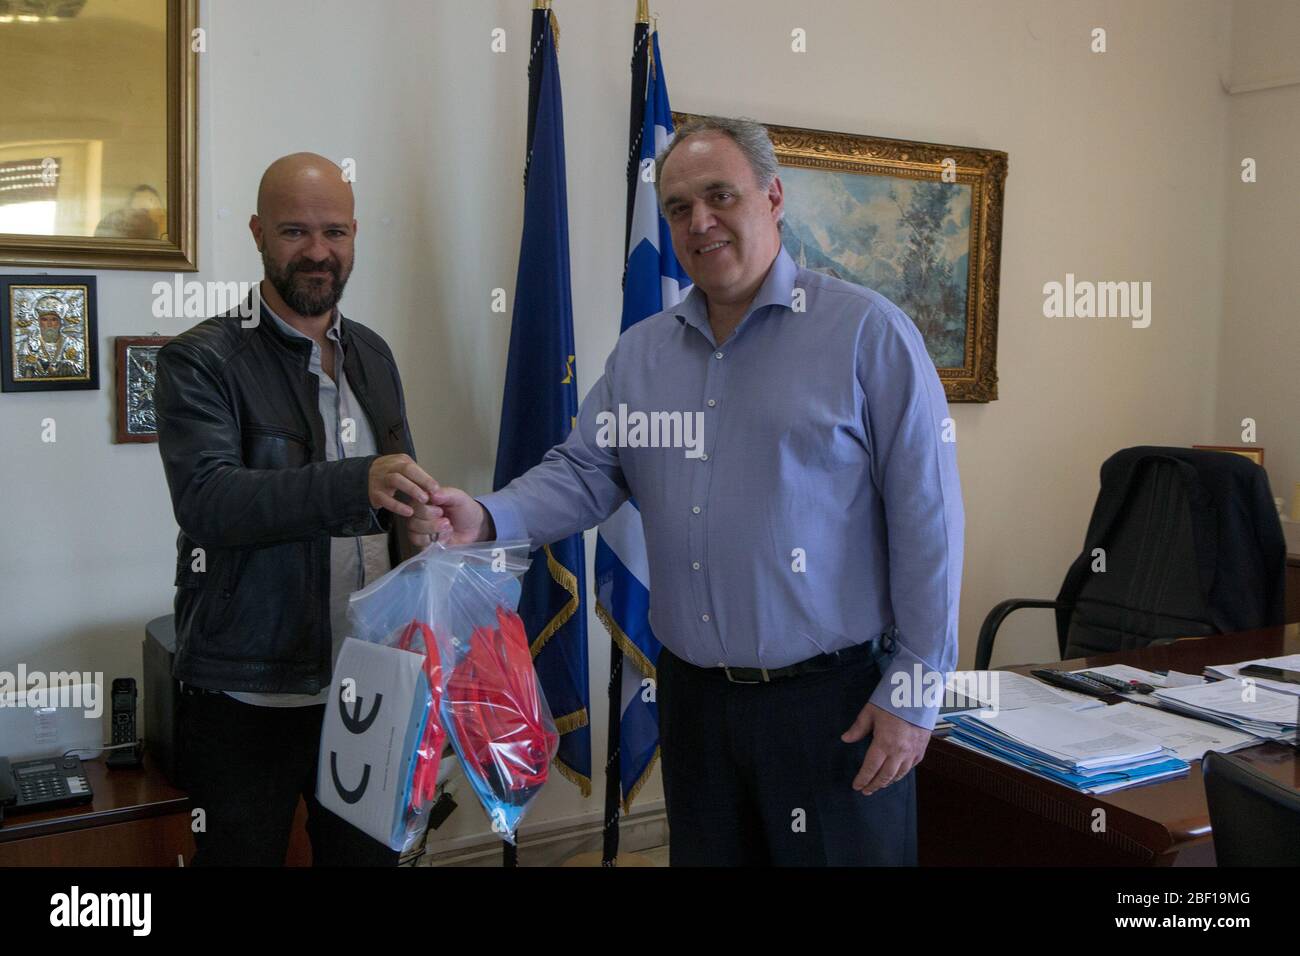 (200416) -- PIRAEUS (GREECE), April 16, 2020 (Xinhua) -- Elias Salpeas (L), advisor of the municipality of Piraeus on new technologies and head of the Blue Lab, delivers 3D printed face shields to a representative of a hospital in Piraeus, Greece, on April 15, 2020. In a hi-tech hub at the Greek port city of Piraeus, experts in new technologies are racing against time day in and day out this April to meet Greek hospitals' needs for personal protective equipment (PPE) in the war against the novel coronavirus pandemic.TO GO WITH 'Feature: In Piraeus, tech experts 3D print face shields for medica Stock Photo